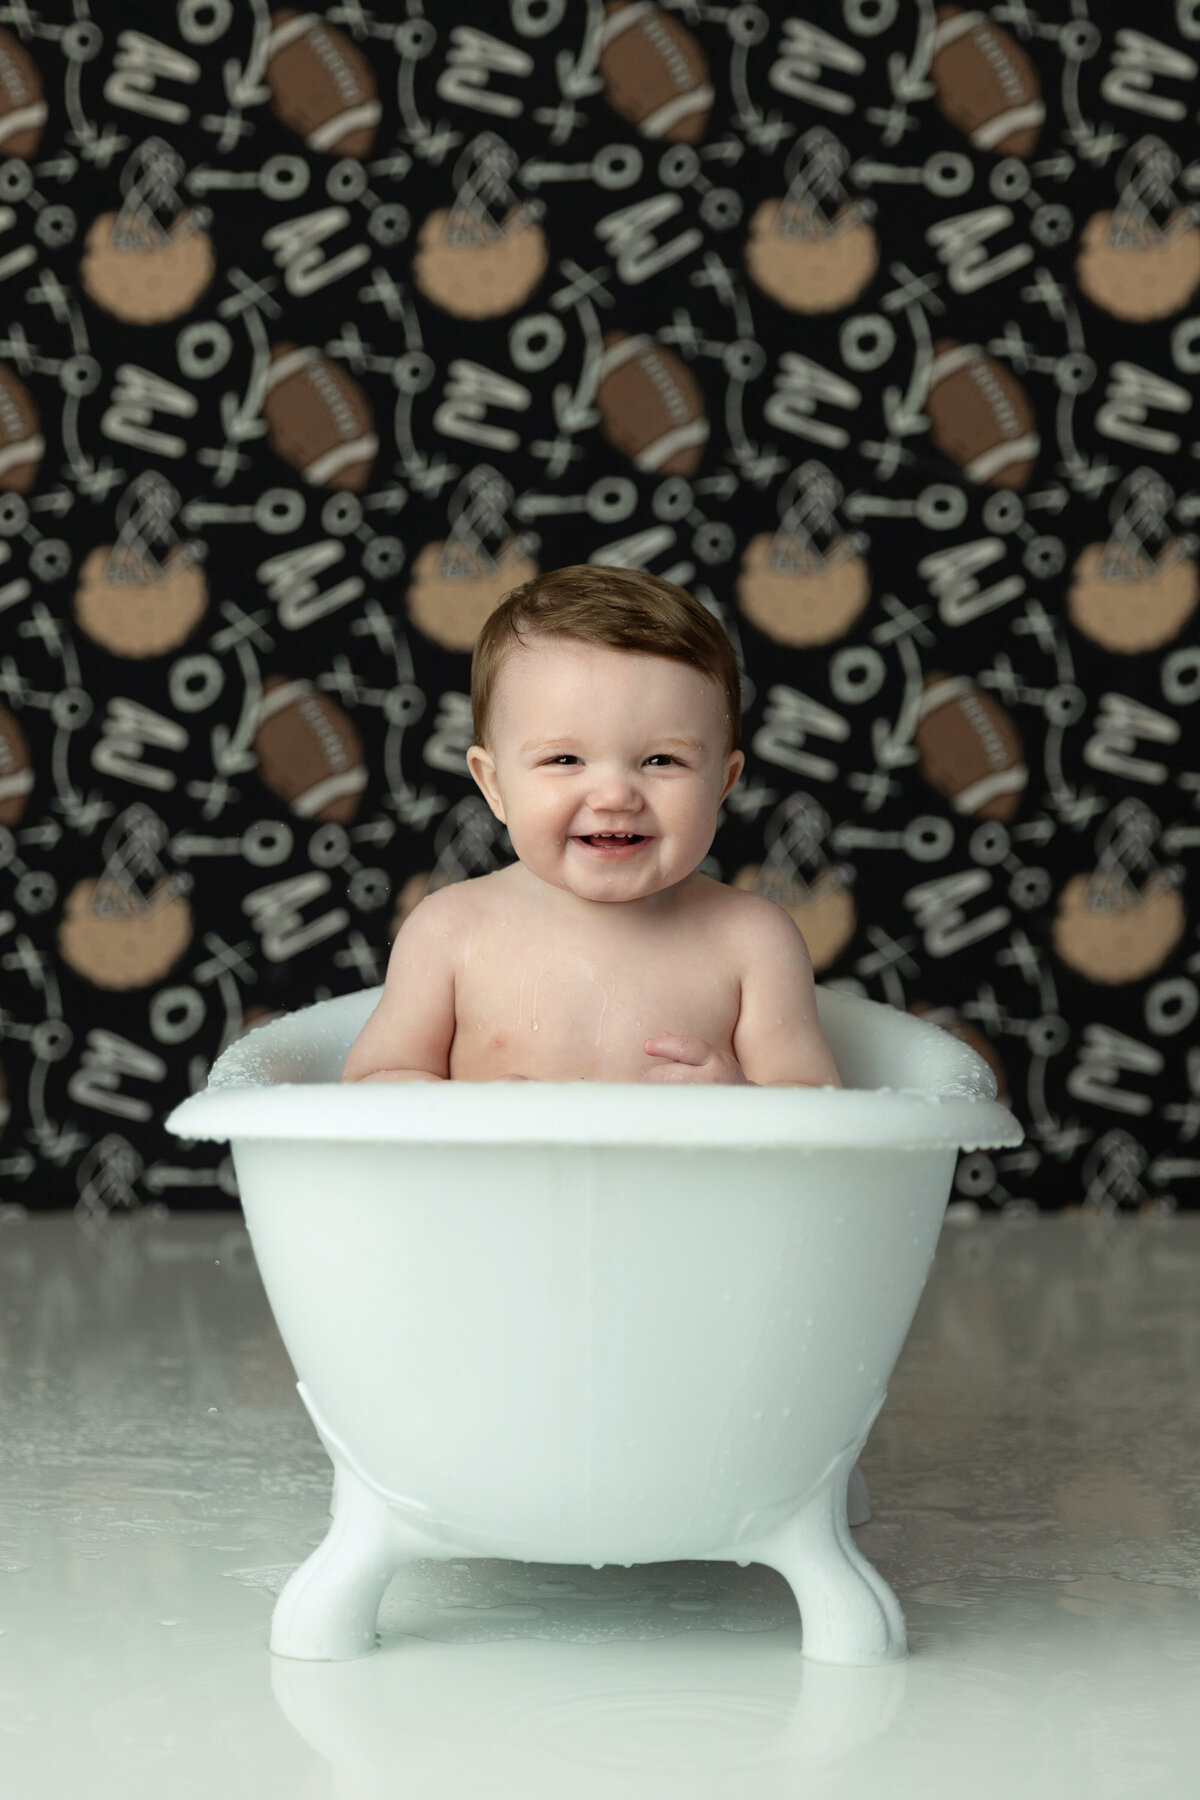 A young toddler boy sits in a small white bathtub in a studio after getting covered in cake